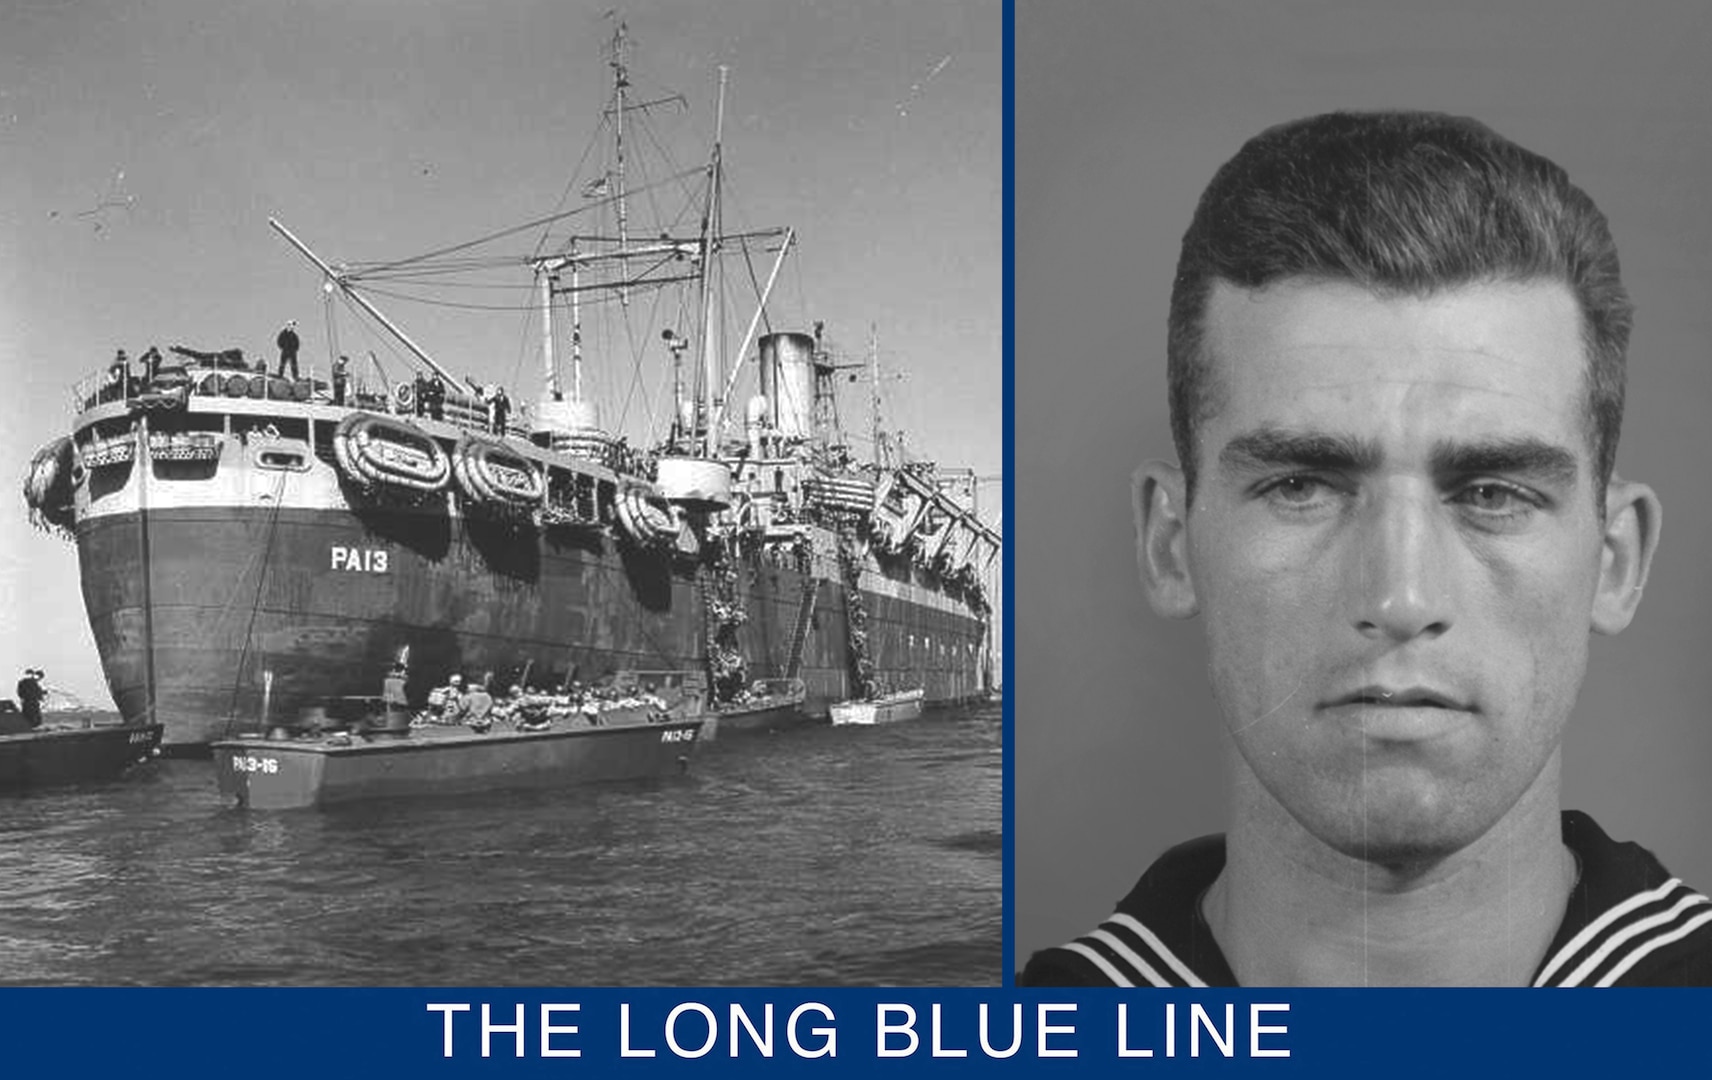 The original enlistment photograph for Robert Grattan Ward, later Silver Star Medal recipient for action on D-Day. (U.S. Coast Guard)
With cargo nets dropped and LCVPs in position, the Joseph Dickman disembarks troops for amphibious landing. (U.S. Coast Guard)